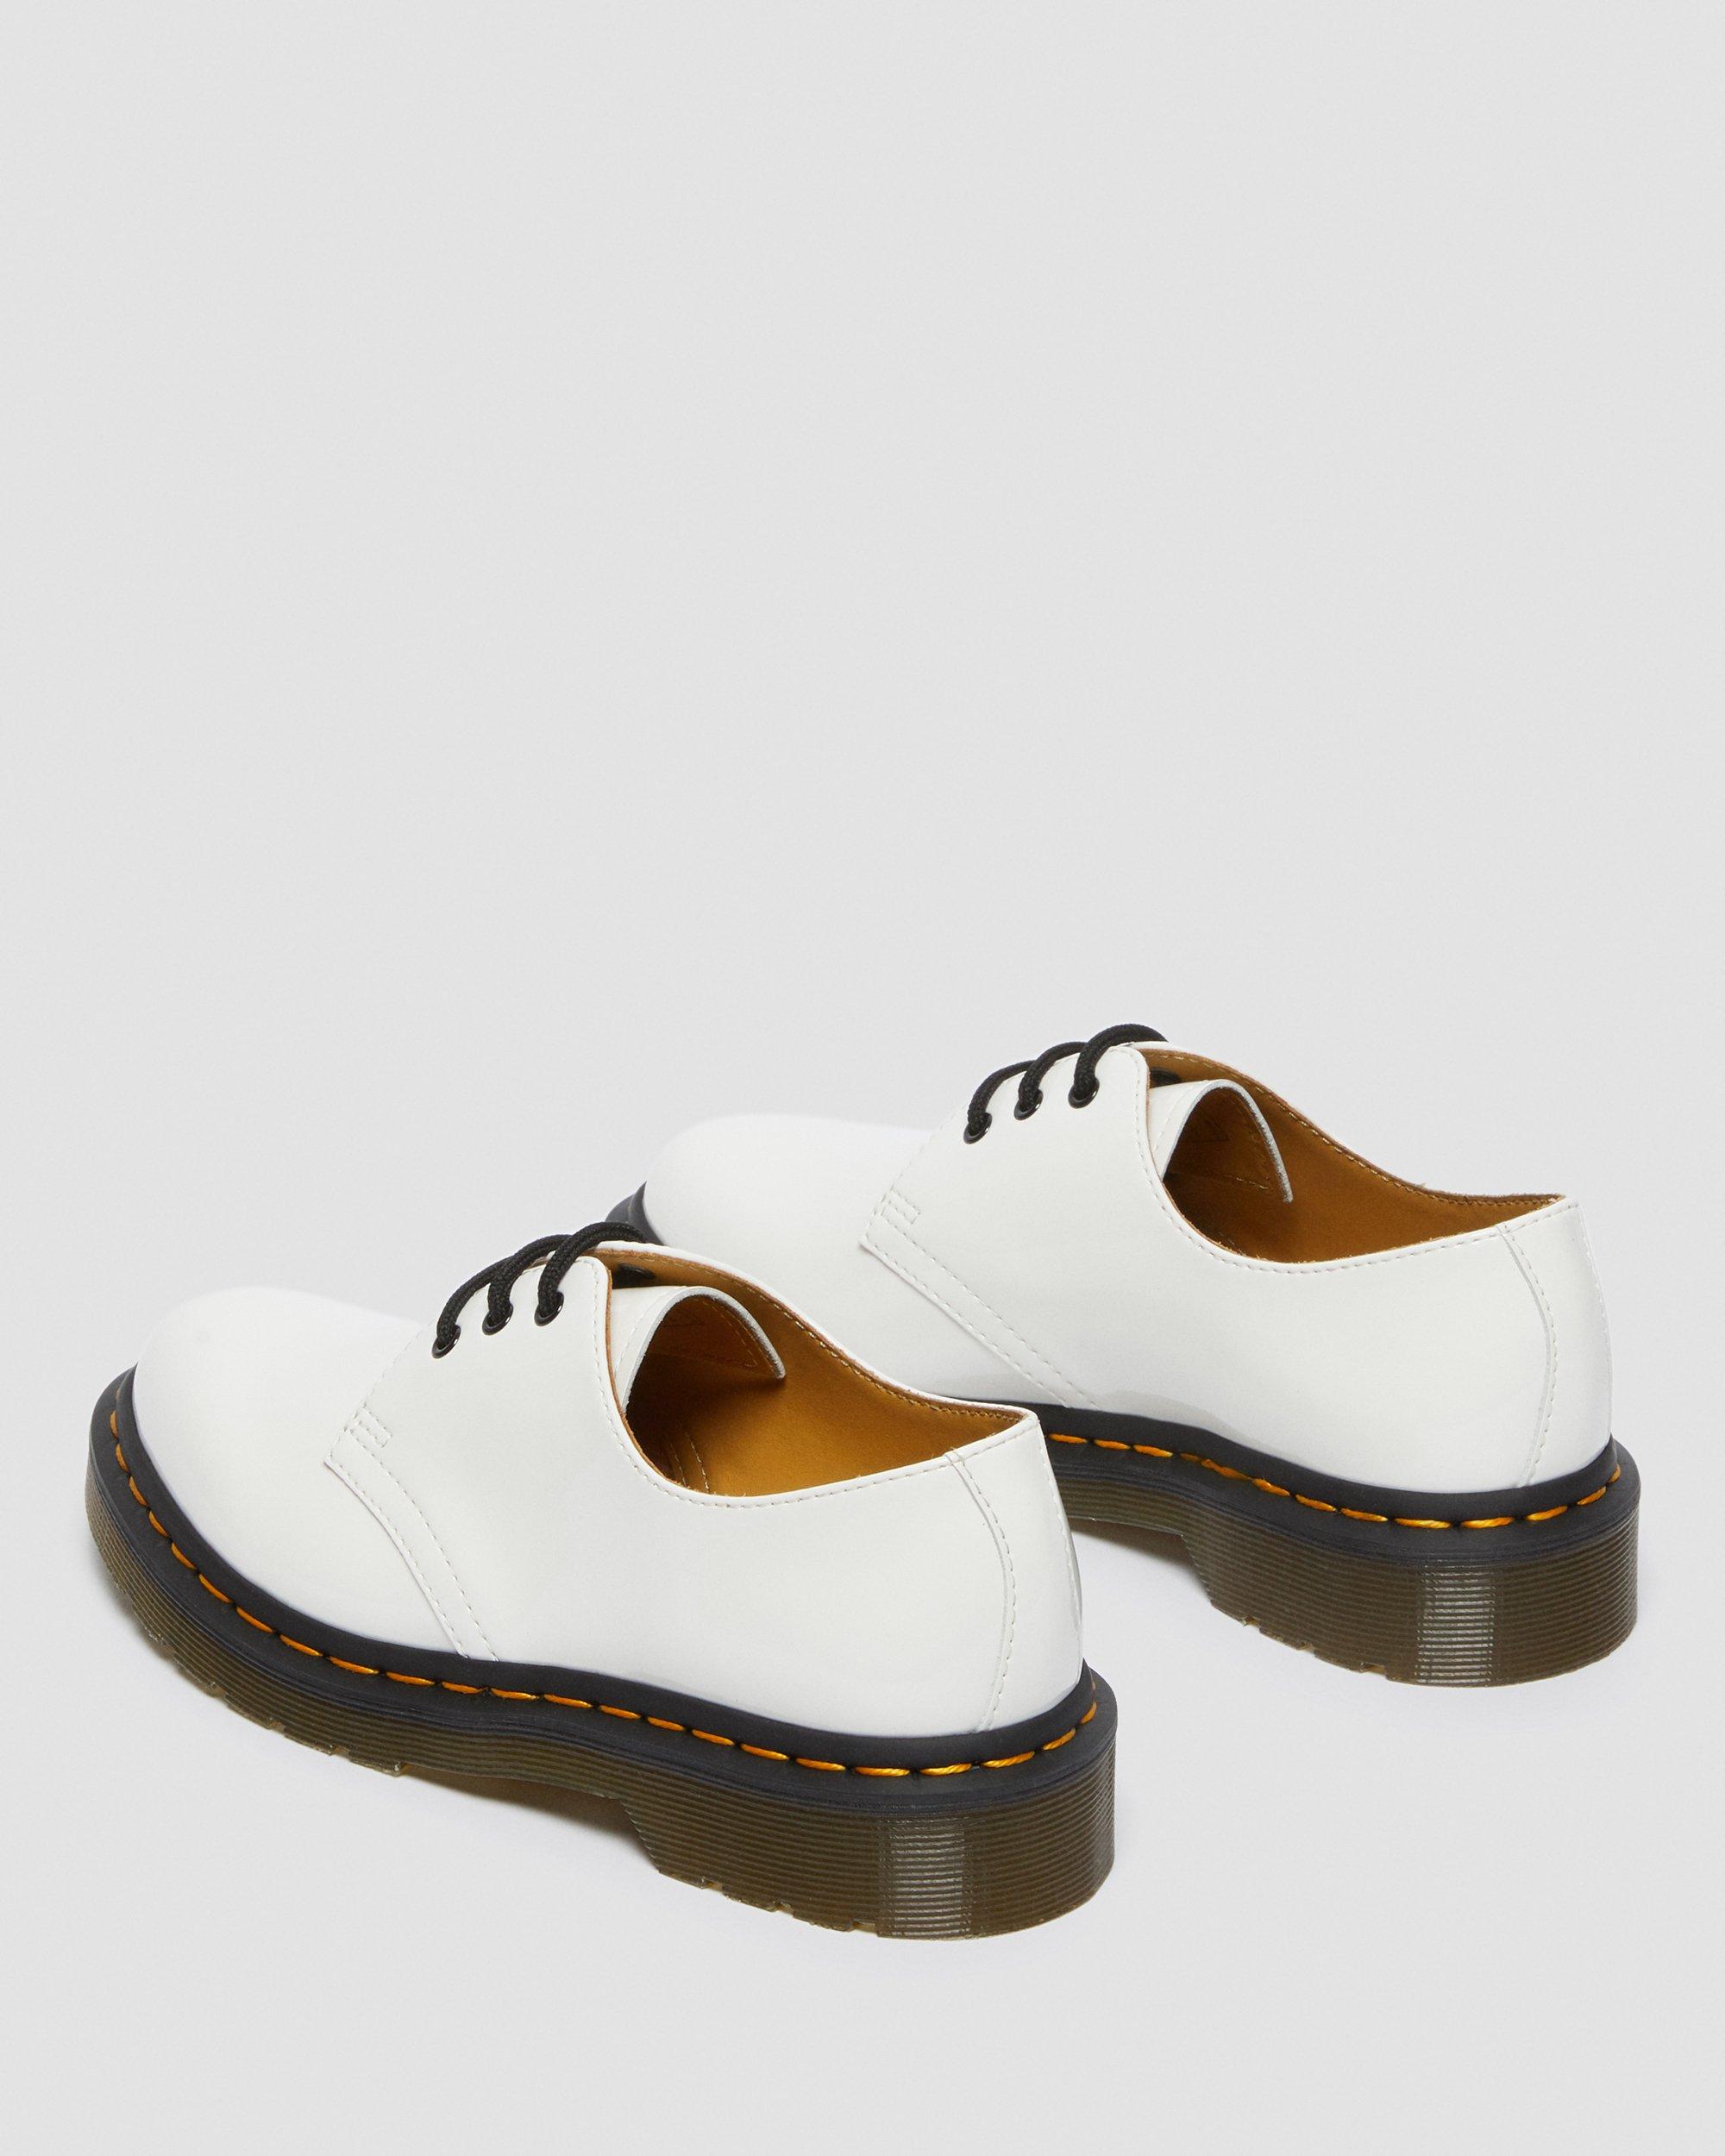 Dr. Martens 1461 Patent White Leather Lamper Oxfords Shoes 26754